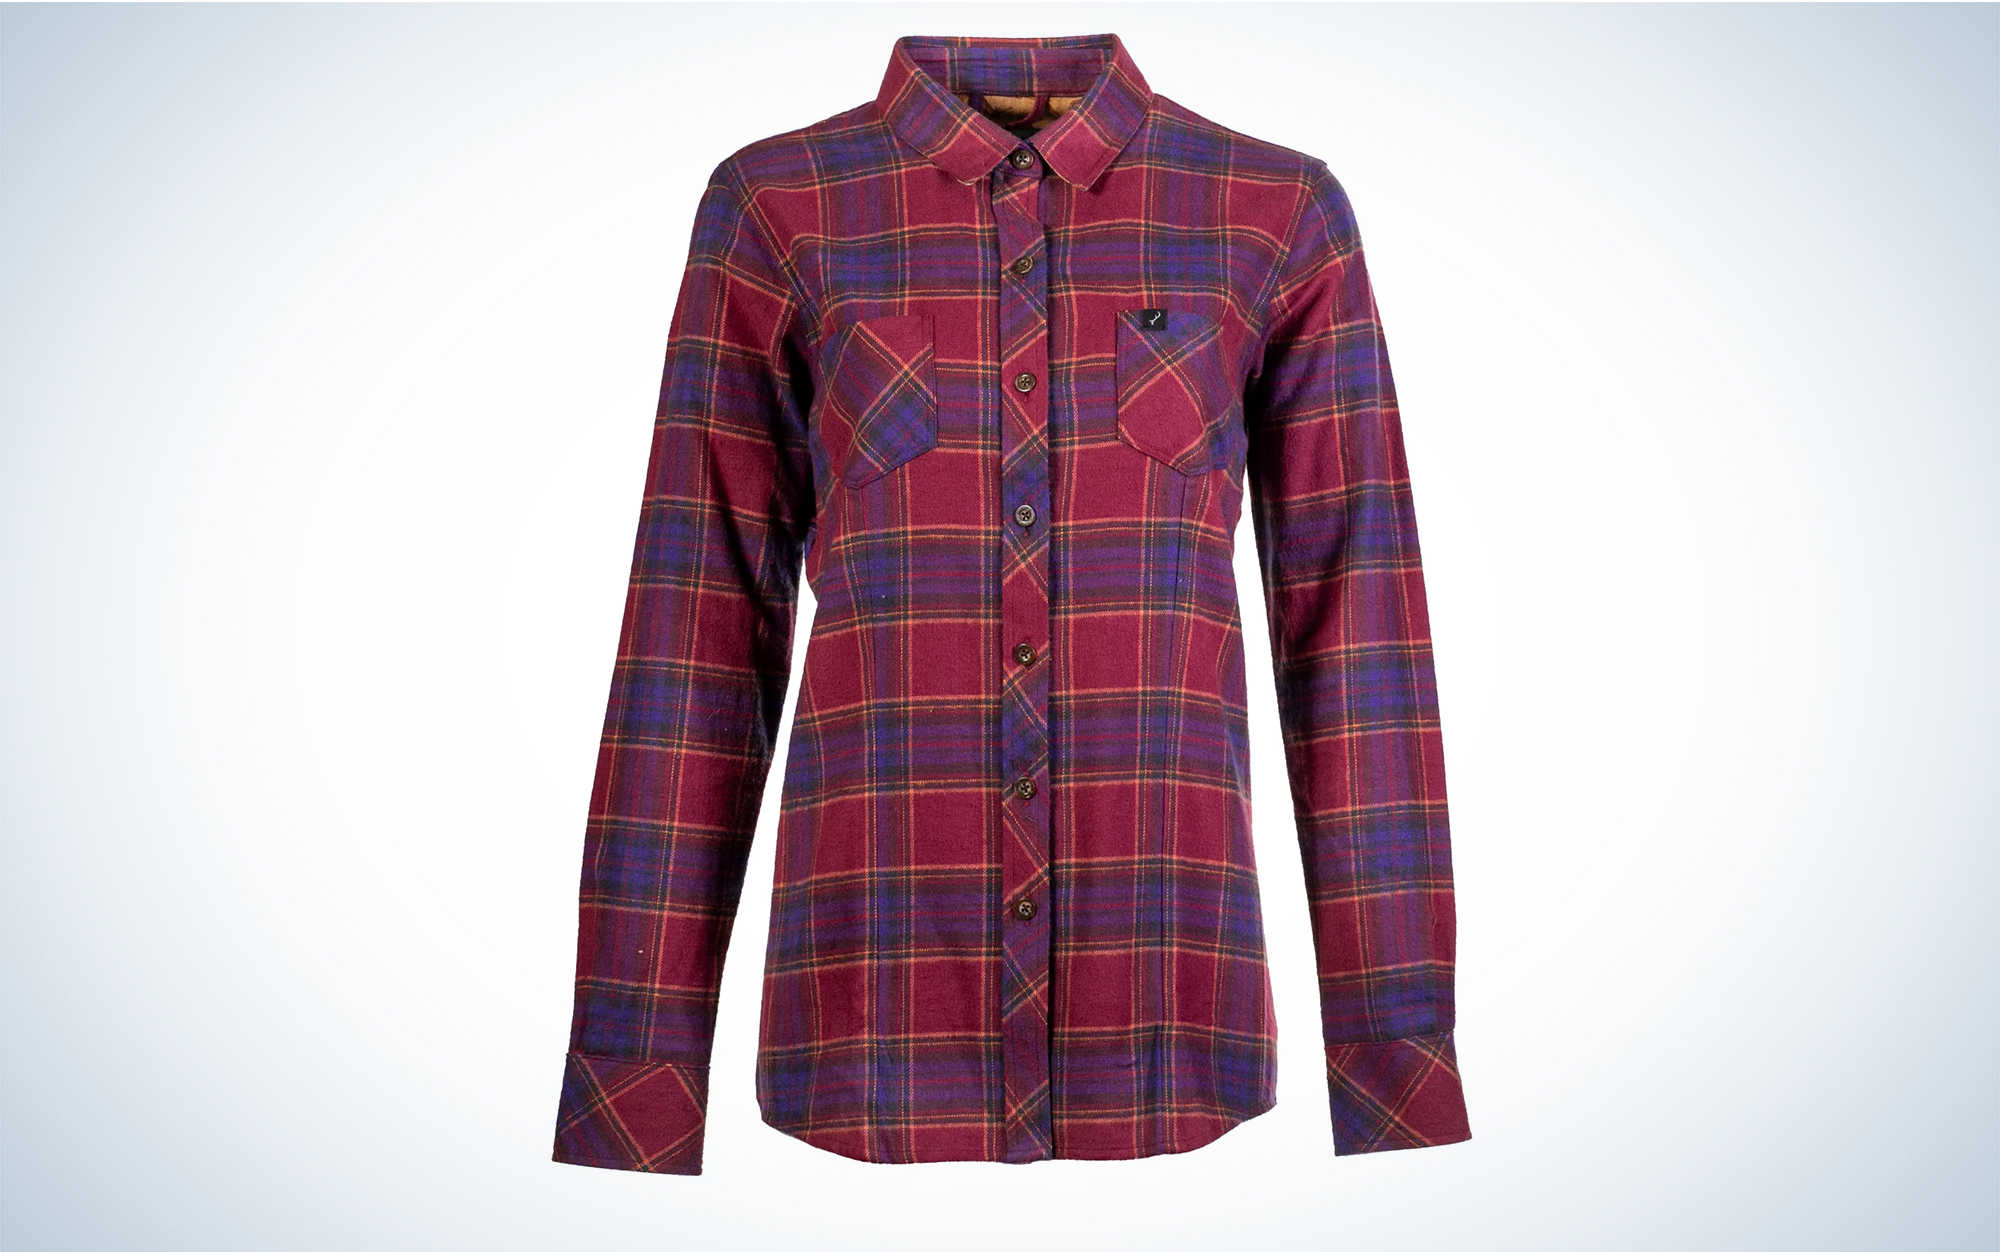 We tested the Pladra Every Day Flannel Shirt.